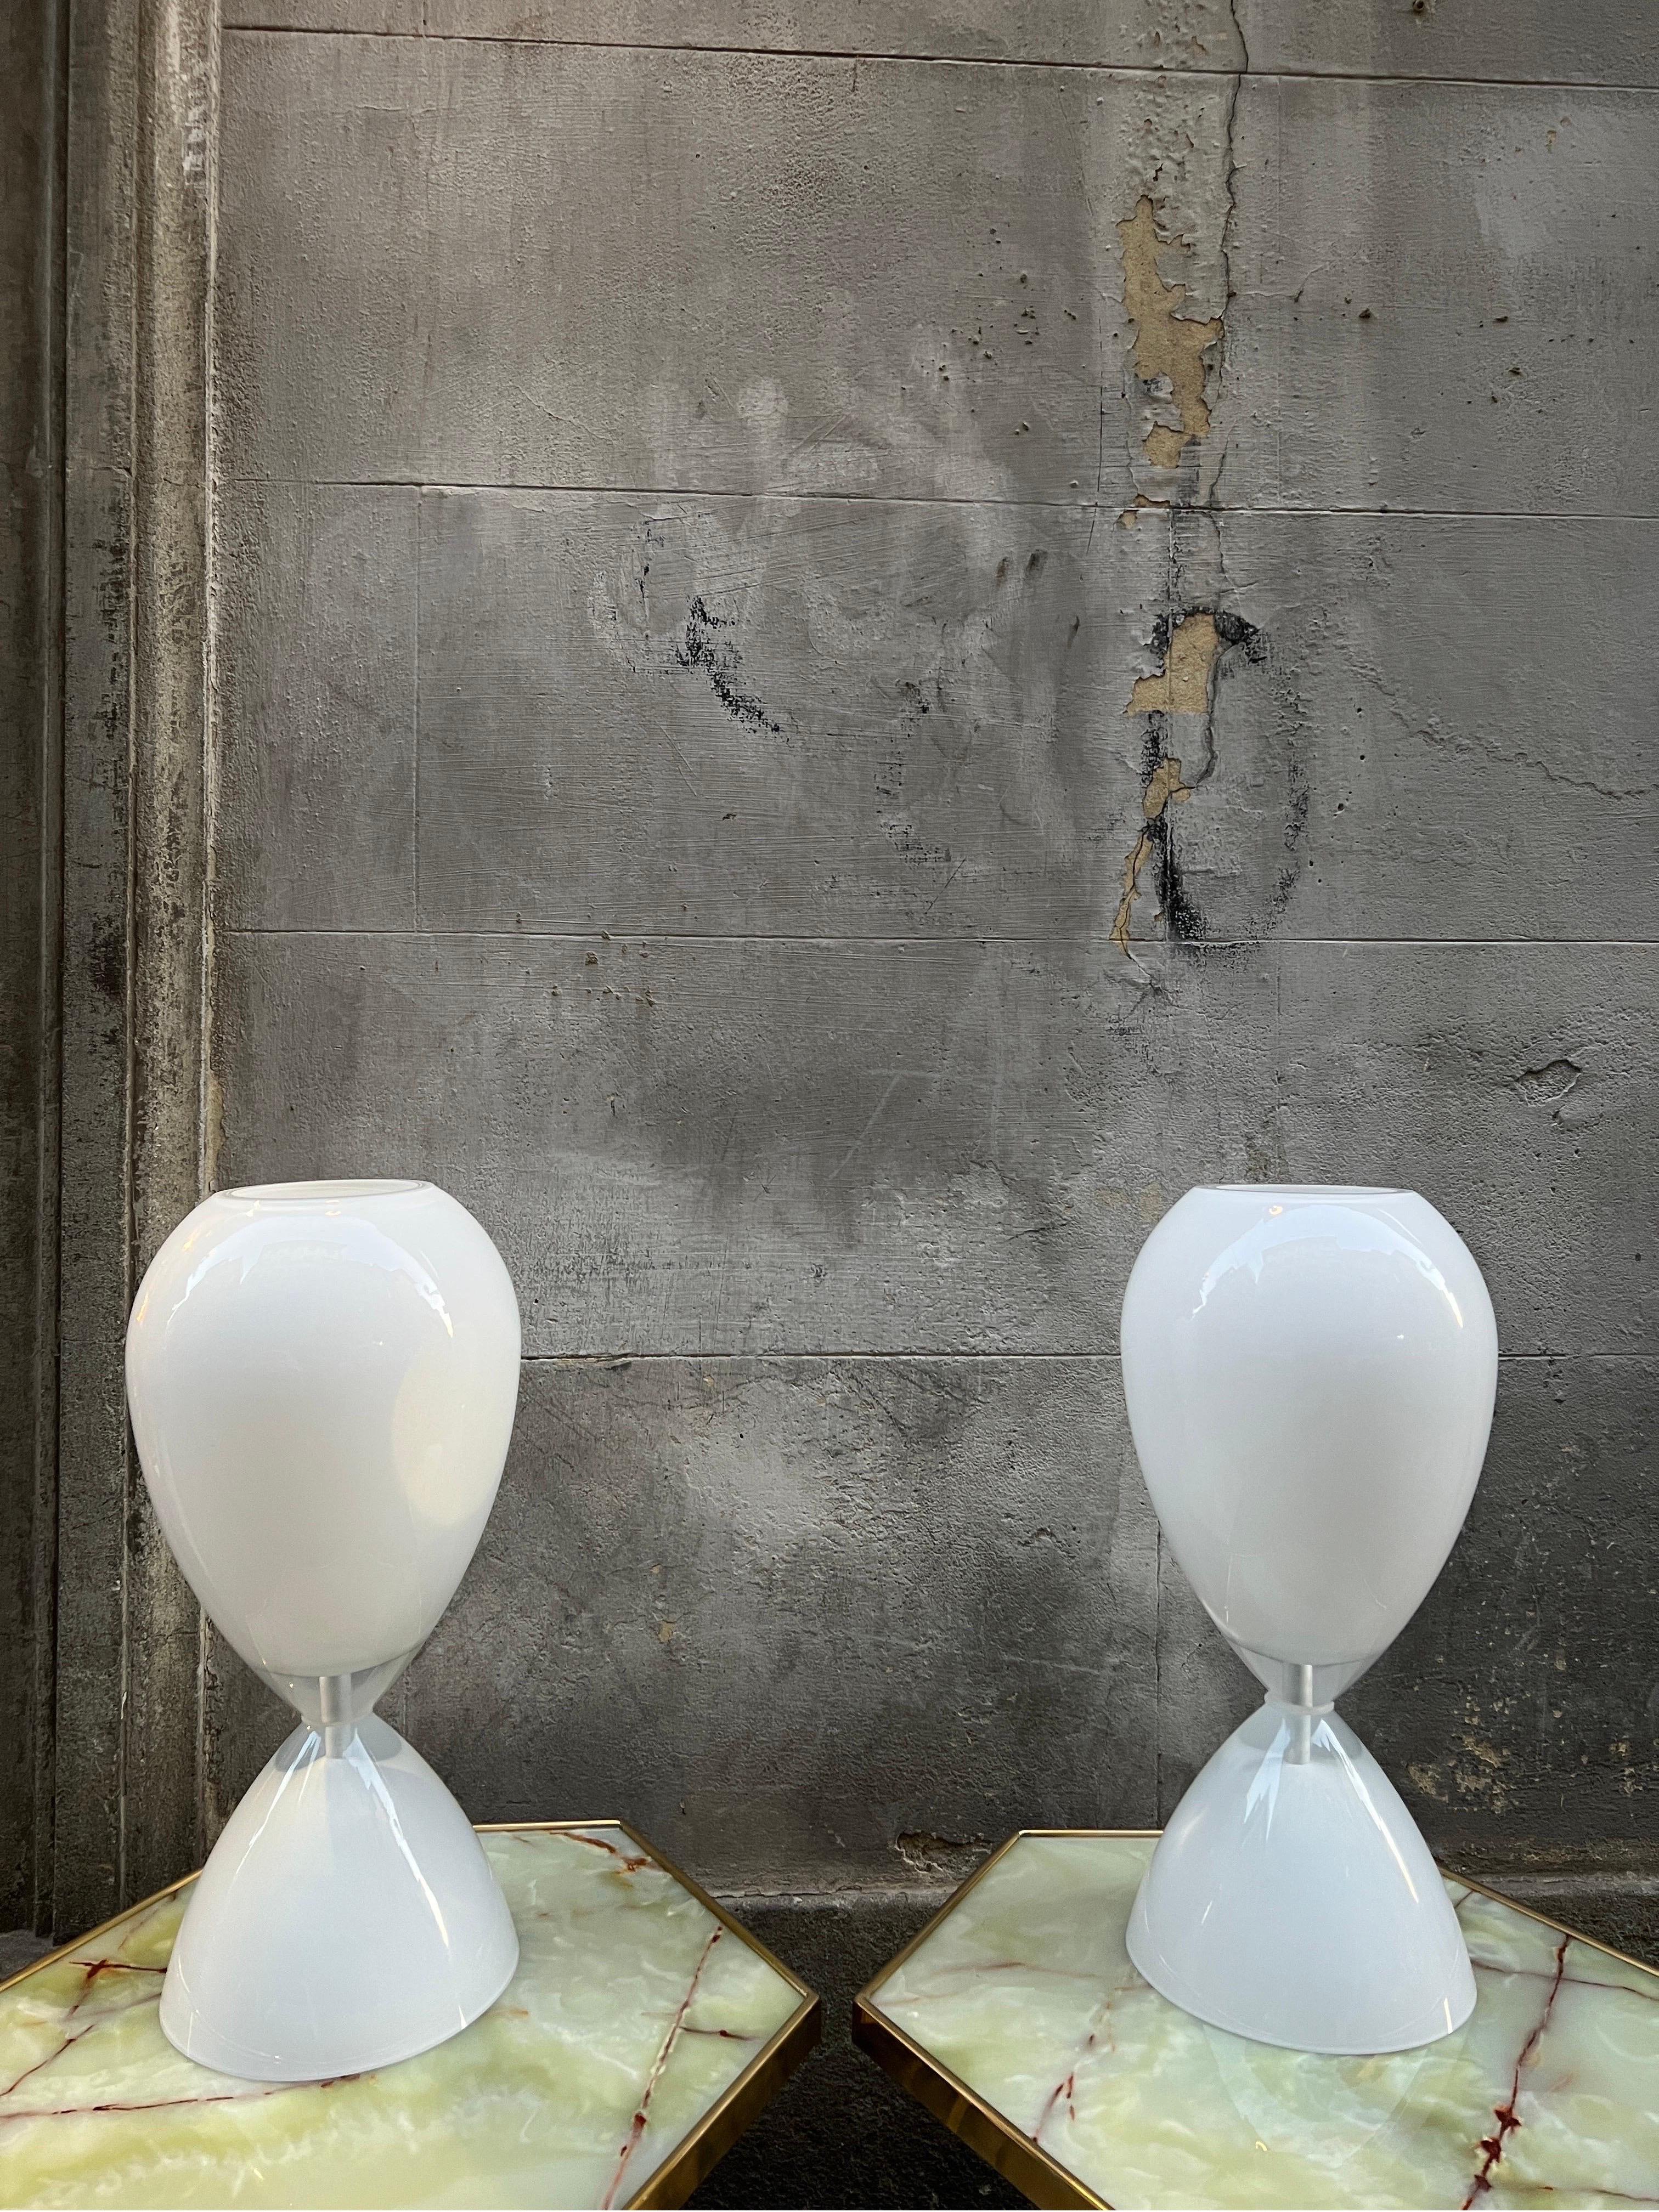 Pair of white hourglass shaped Murano Glass table lamps. 
Italian Vintage design mid-century era.
One bulb each lamp.
Available a blue version.